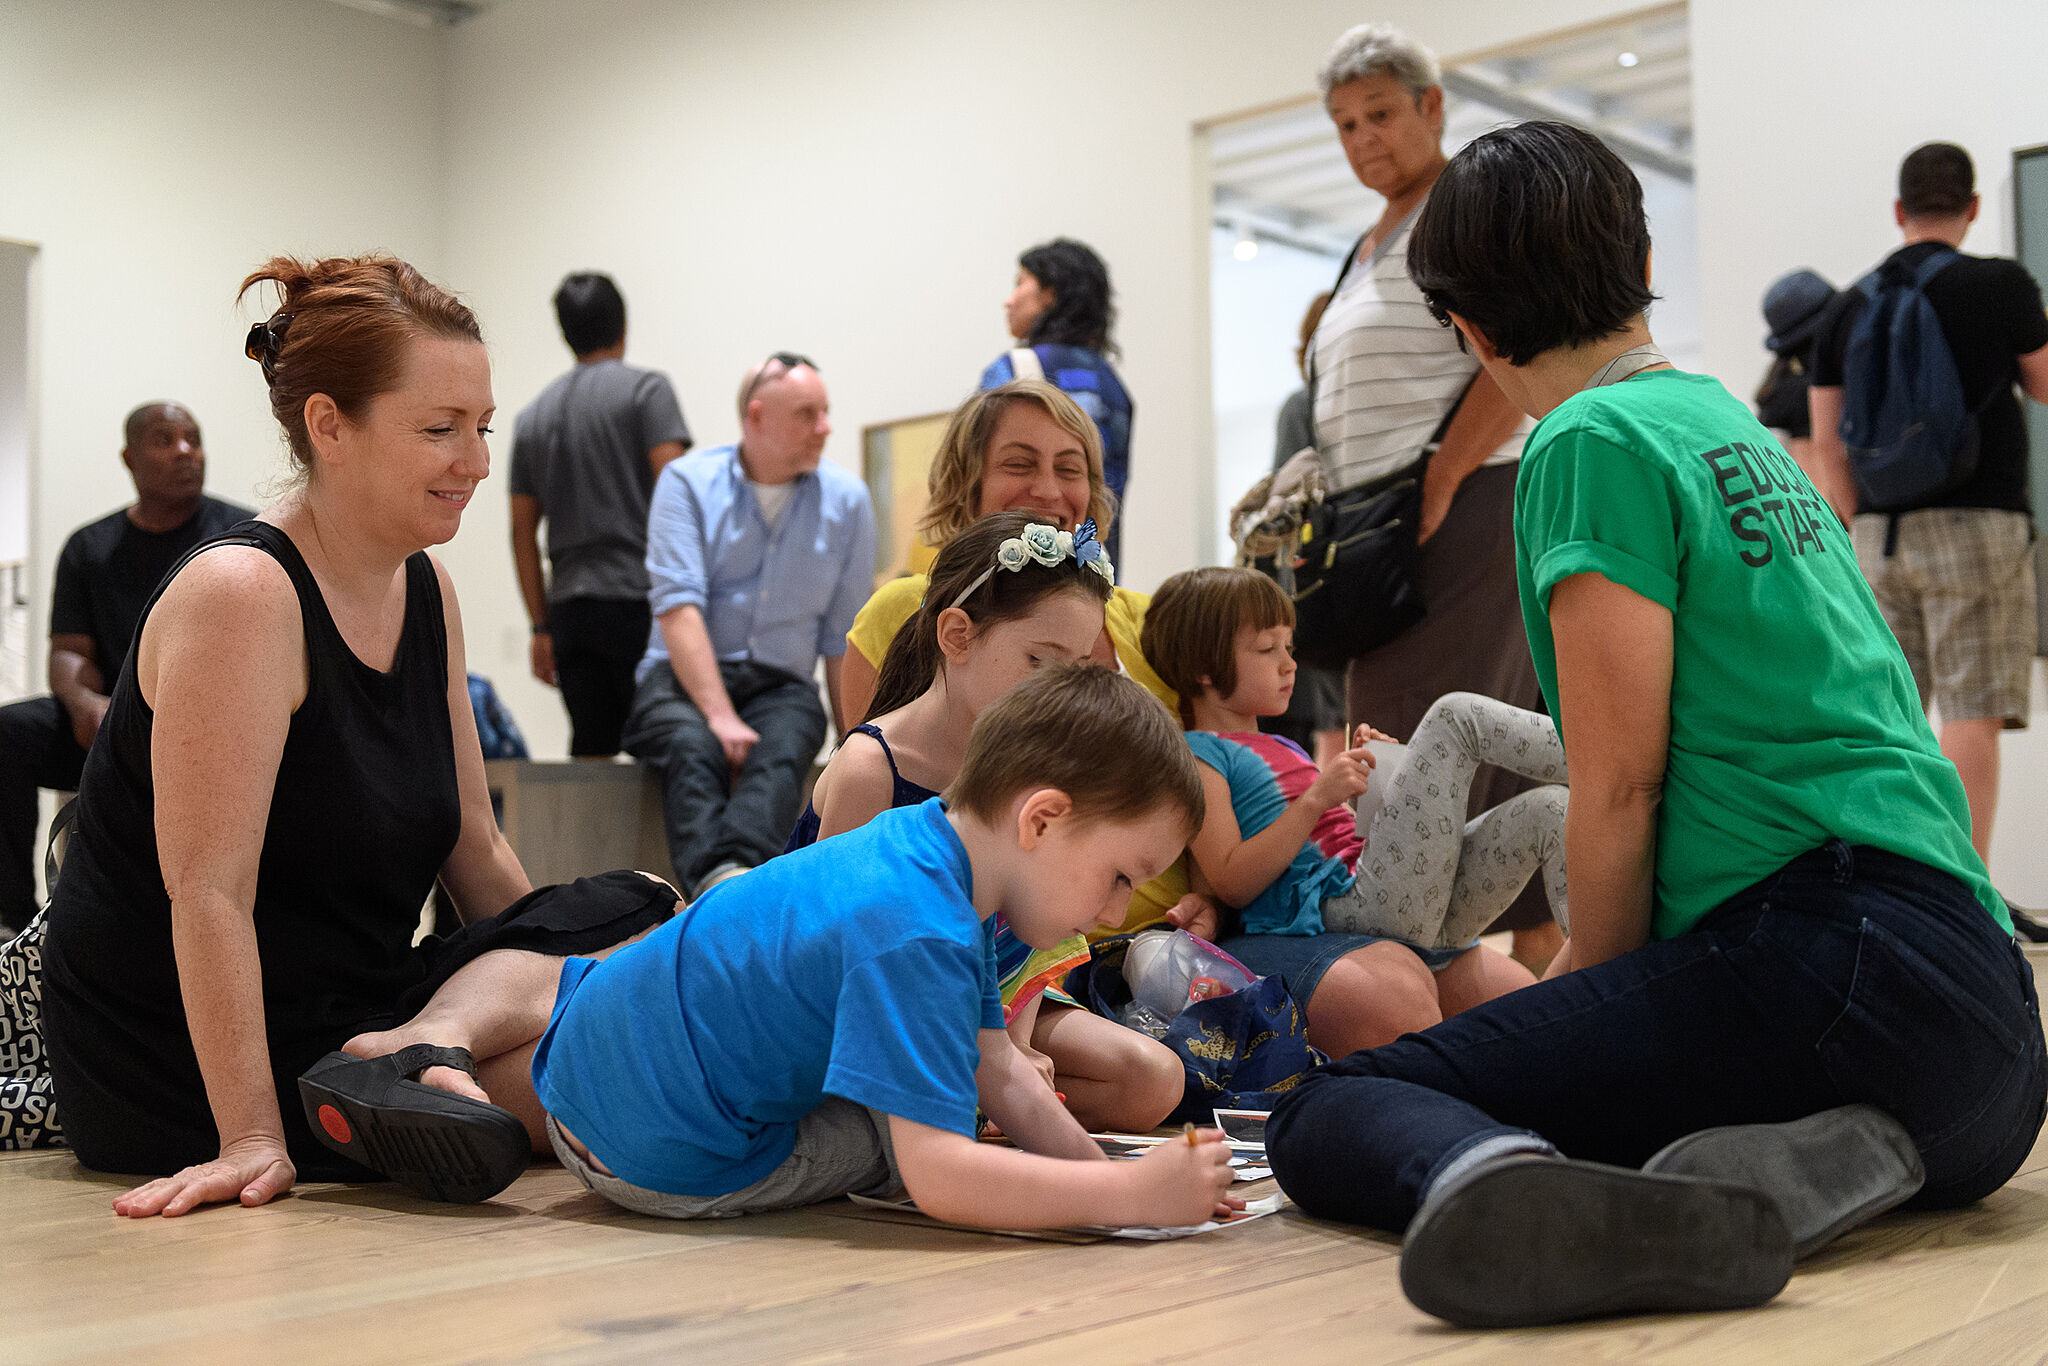 Families exploring art together in the galleries.